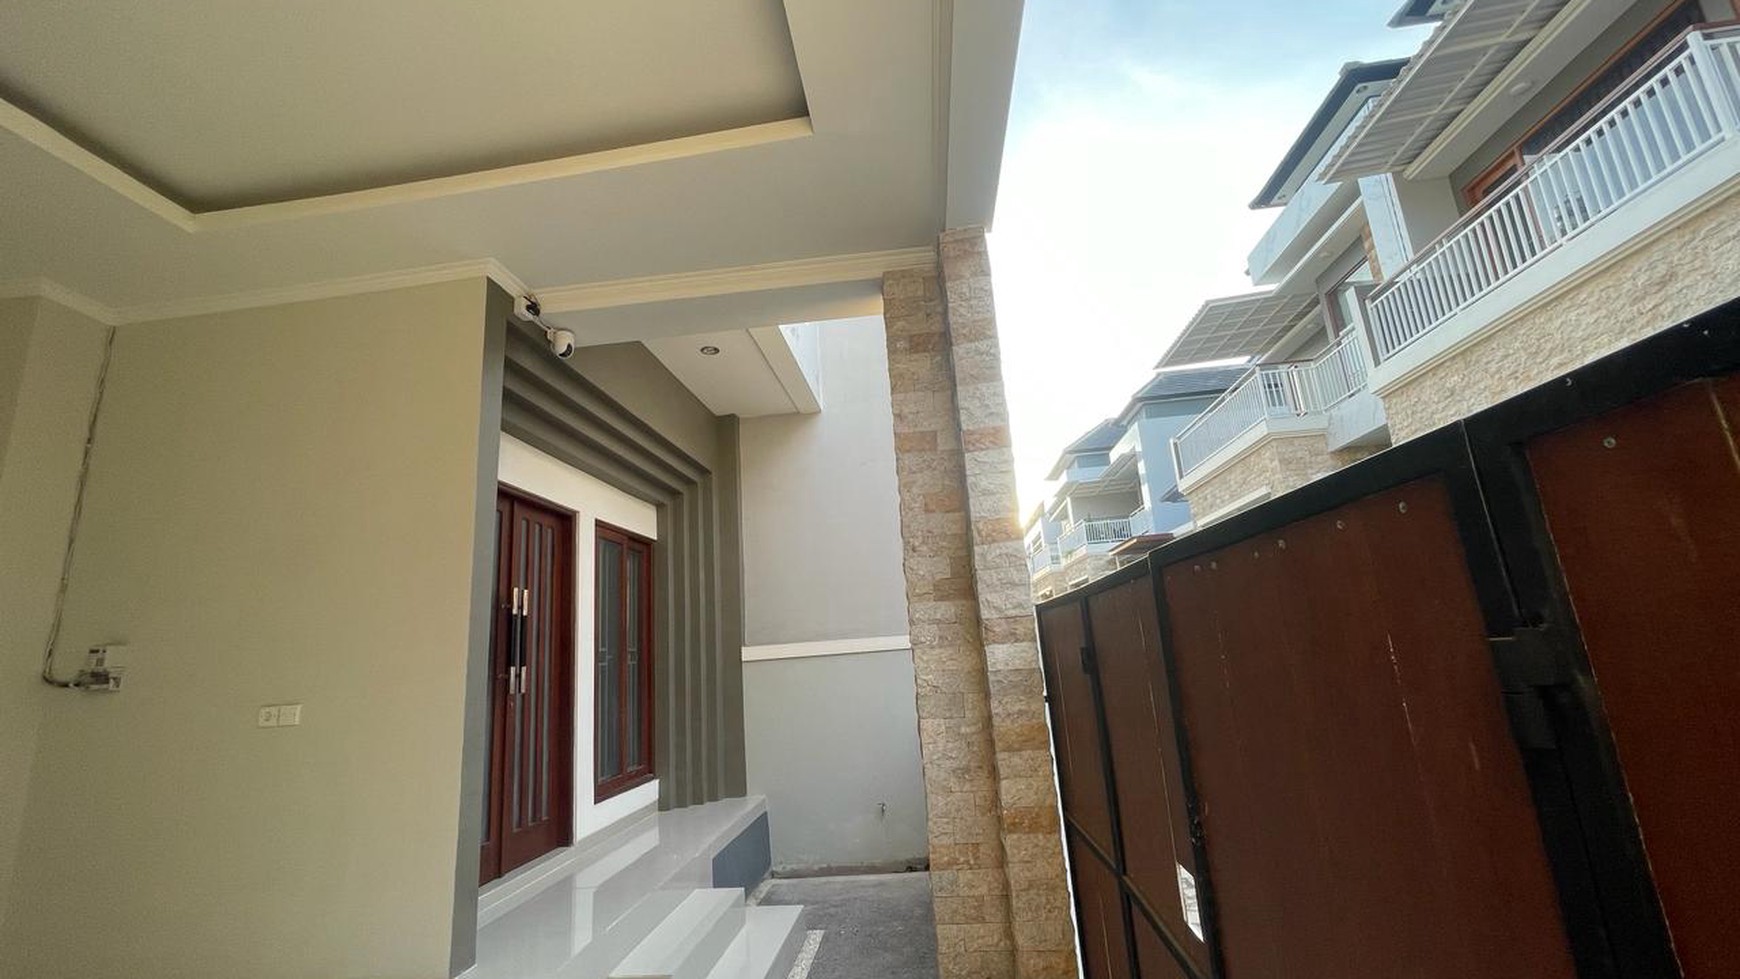 For Rent Yearly - Brand new minimalis modern house in Sanur